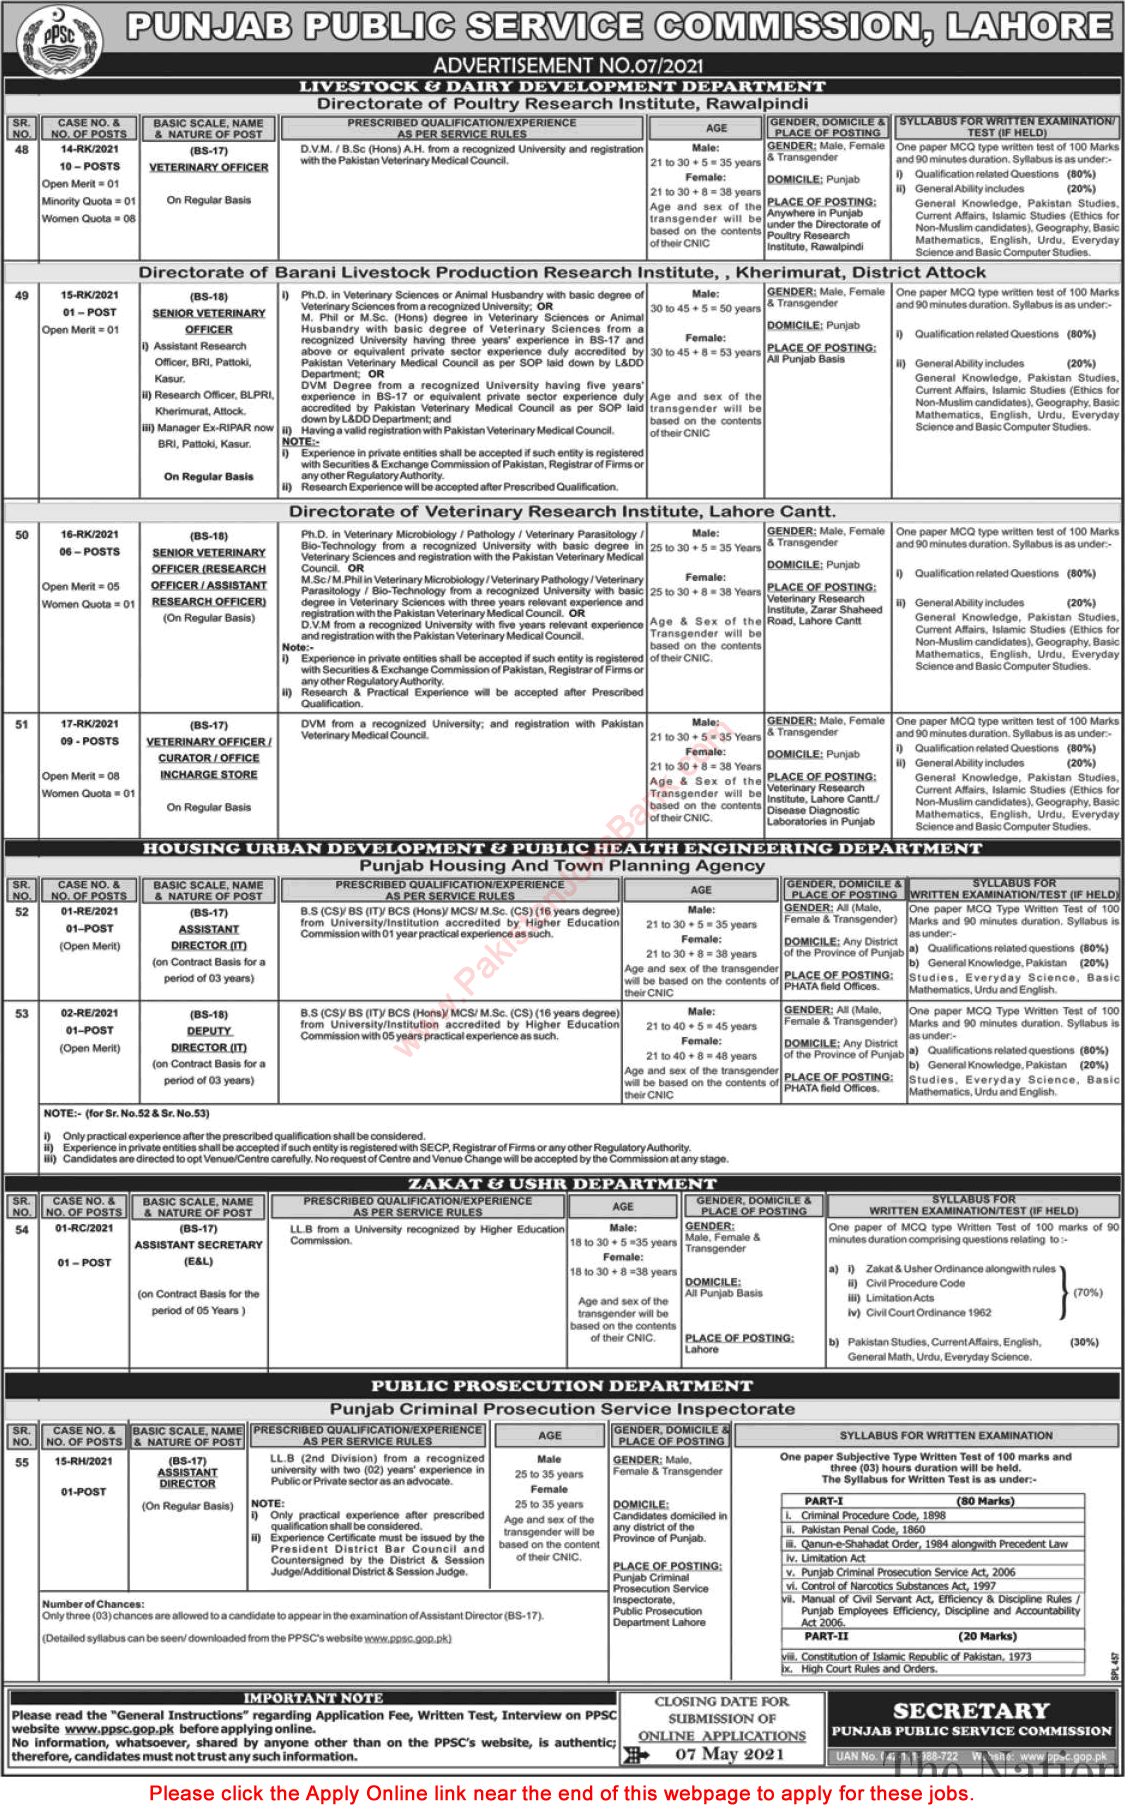 PPSC Jobs April 2021 Apply Online Consolidated Advertisement No 07/2021 7/2021 Latest